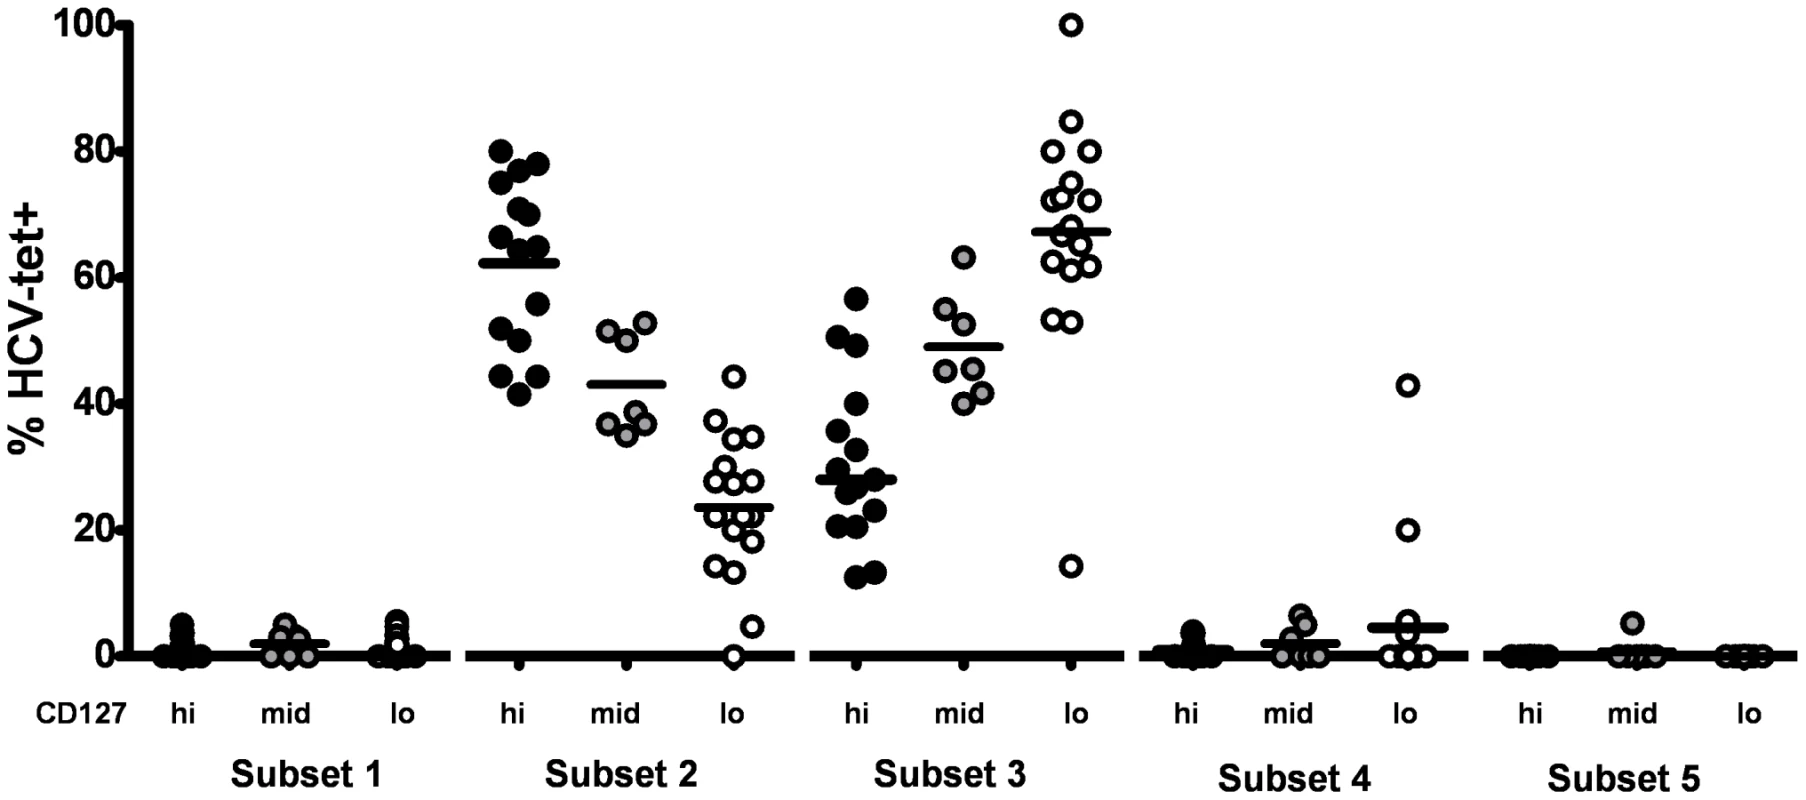 Differences in HCV-specific CD8+ T cell differentiation depending on CD127 expression.